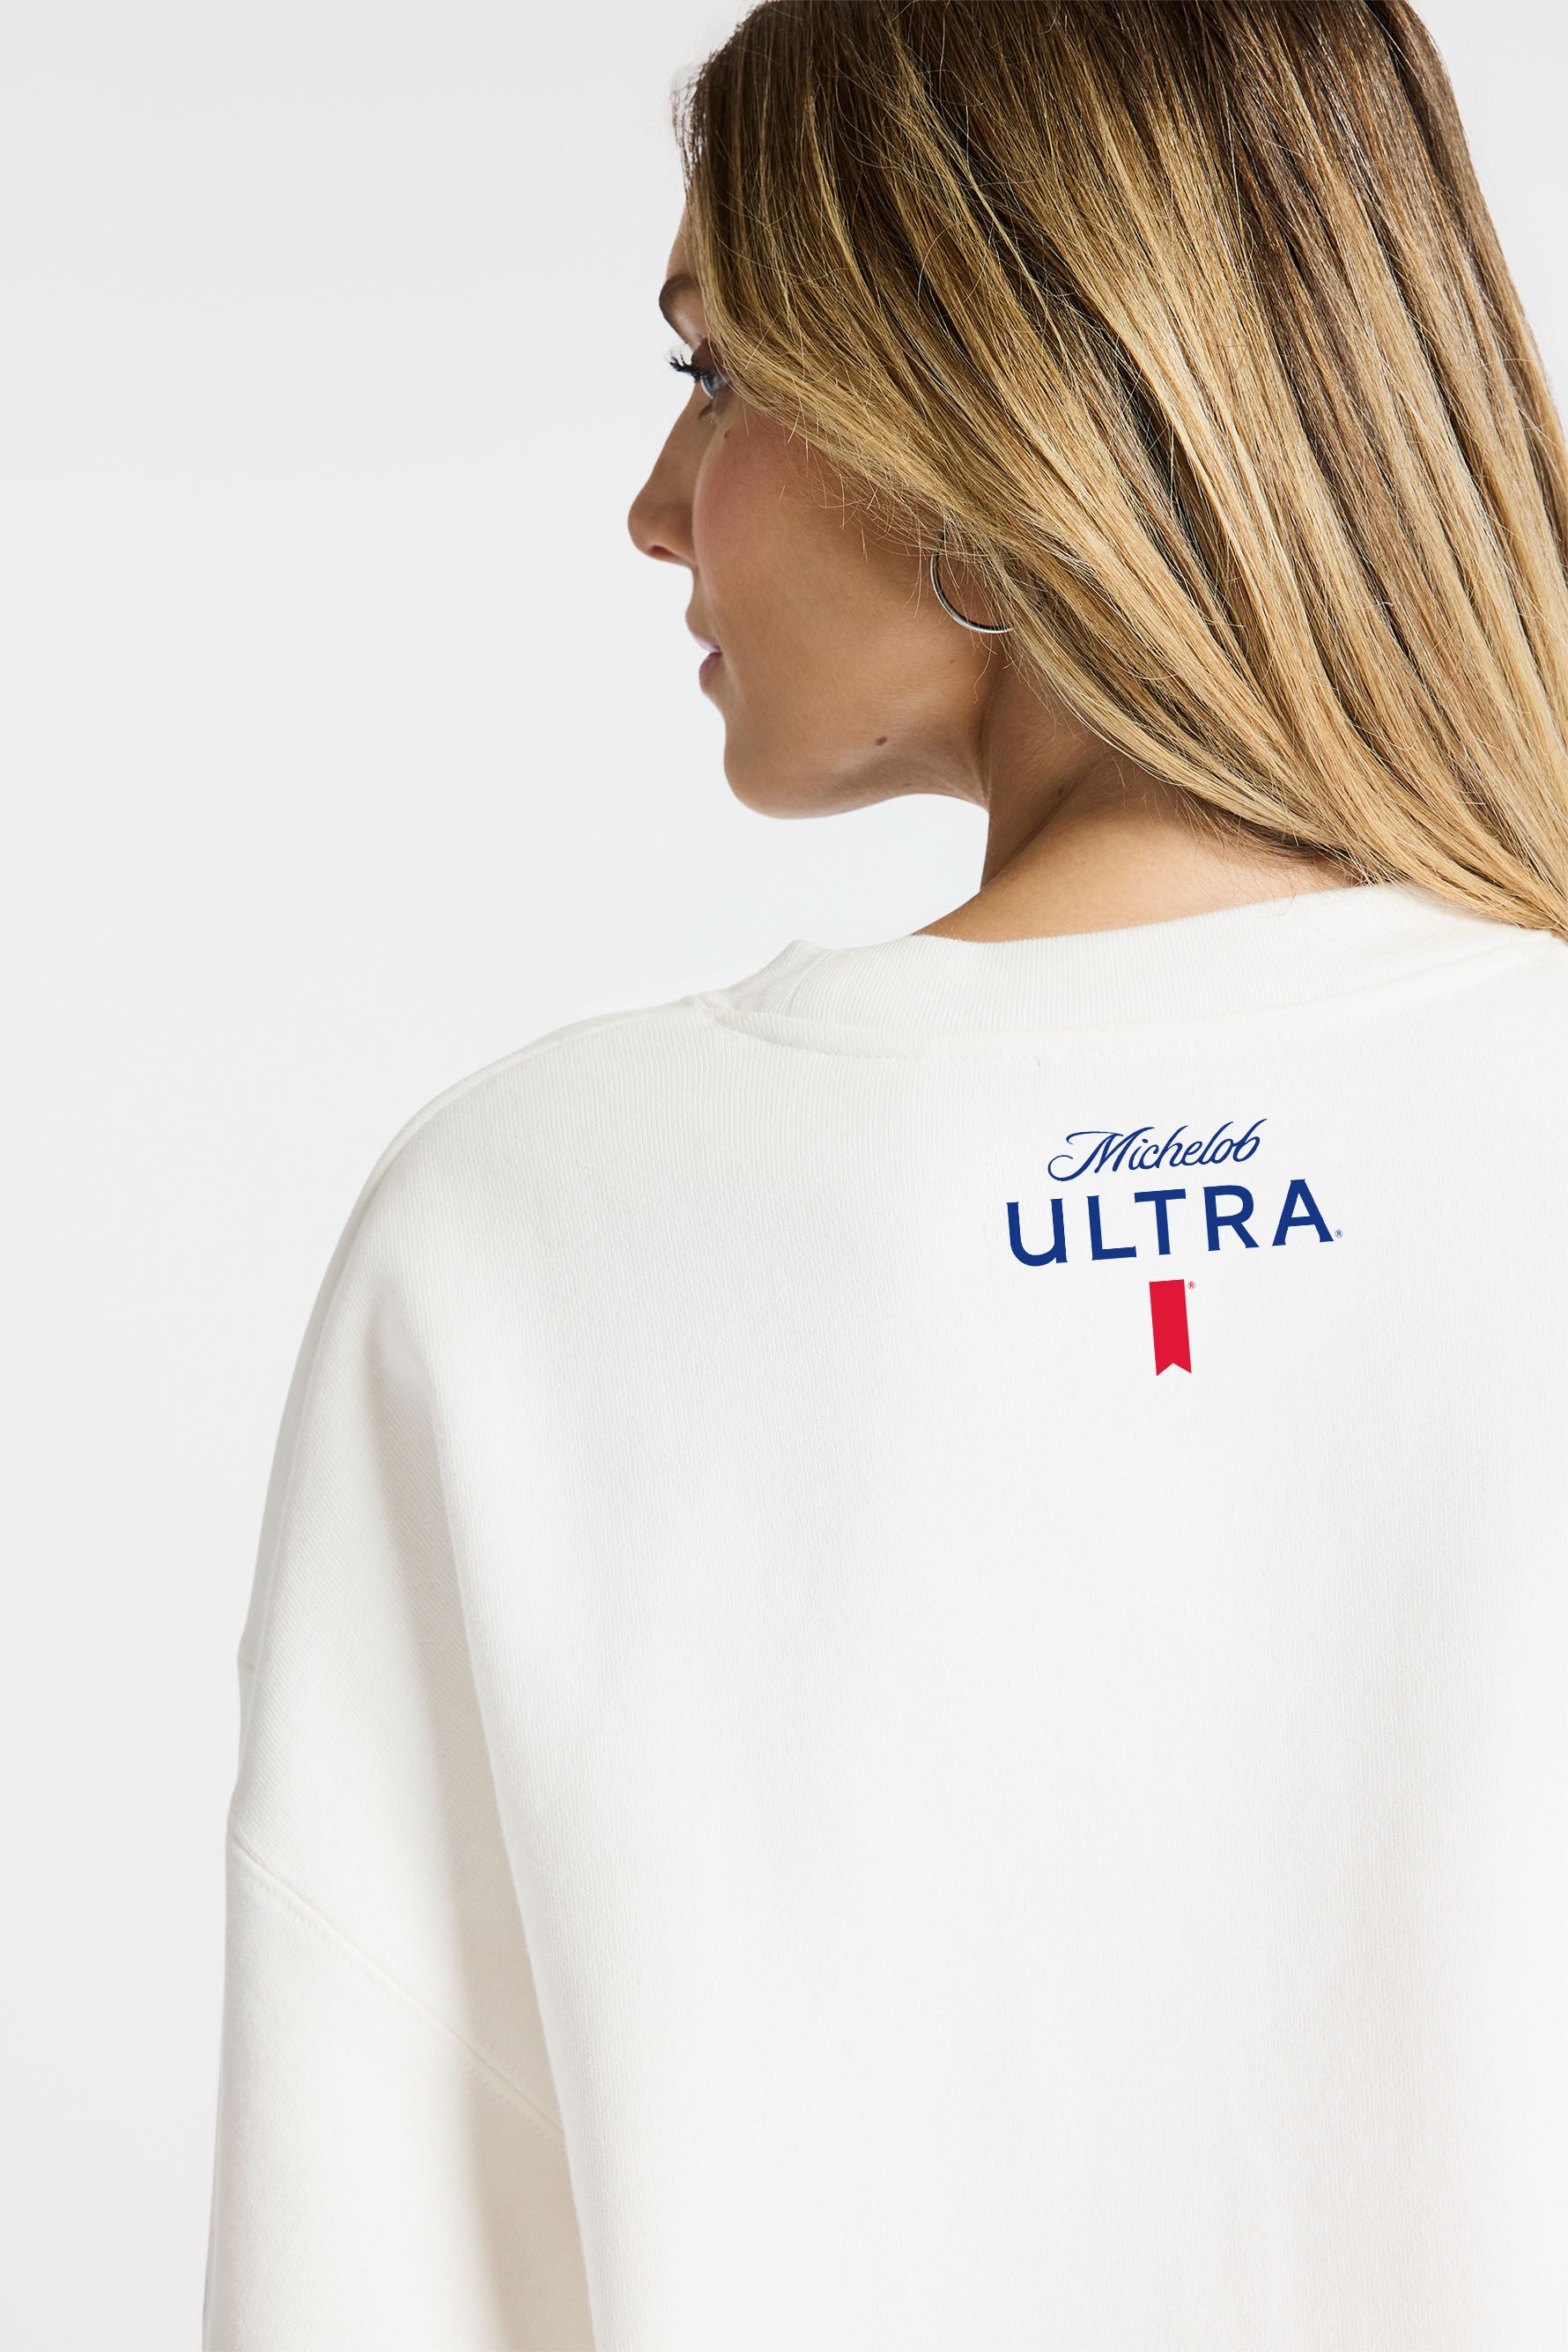 Back view of Model wearing Bandier x Michelob ULTRA Sweatshirt, Michelob ULTRA logo and ribbon at top of center back sweatshirt